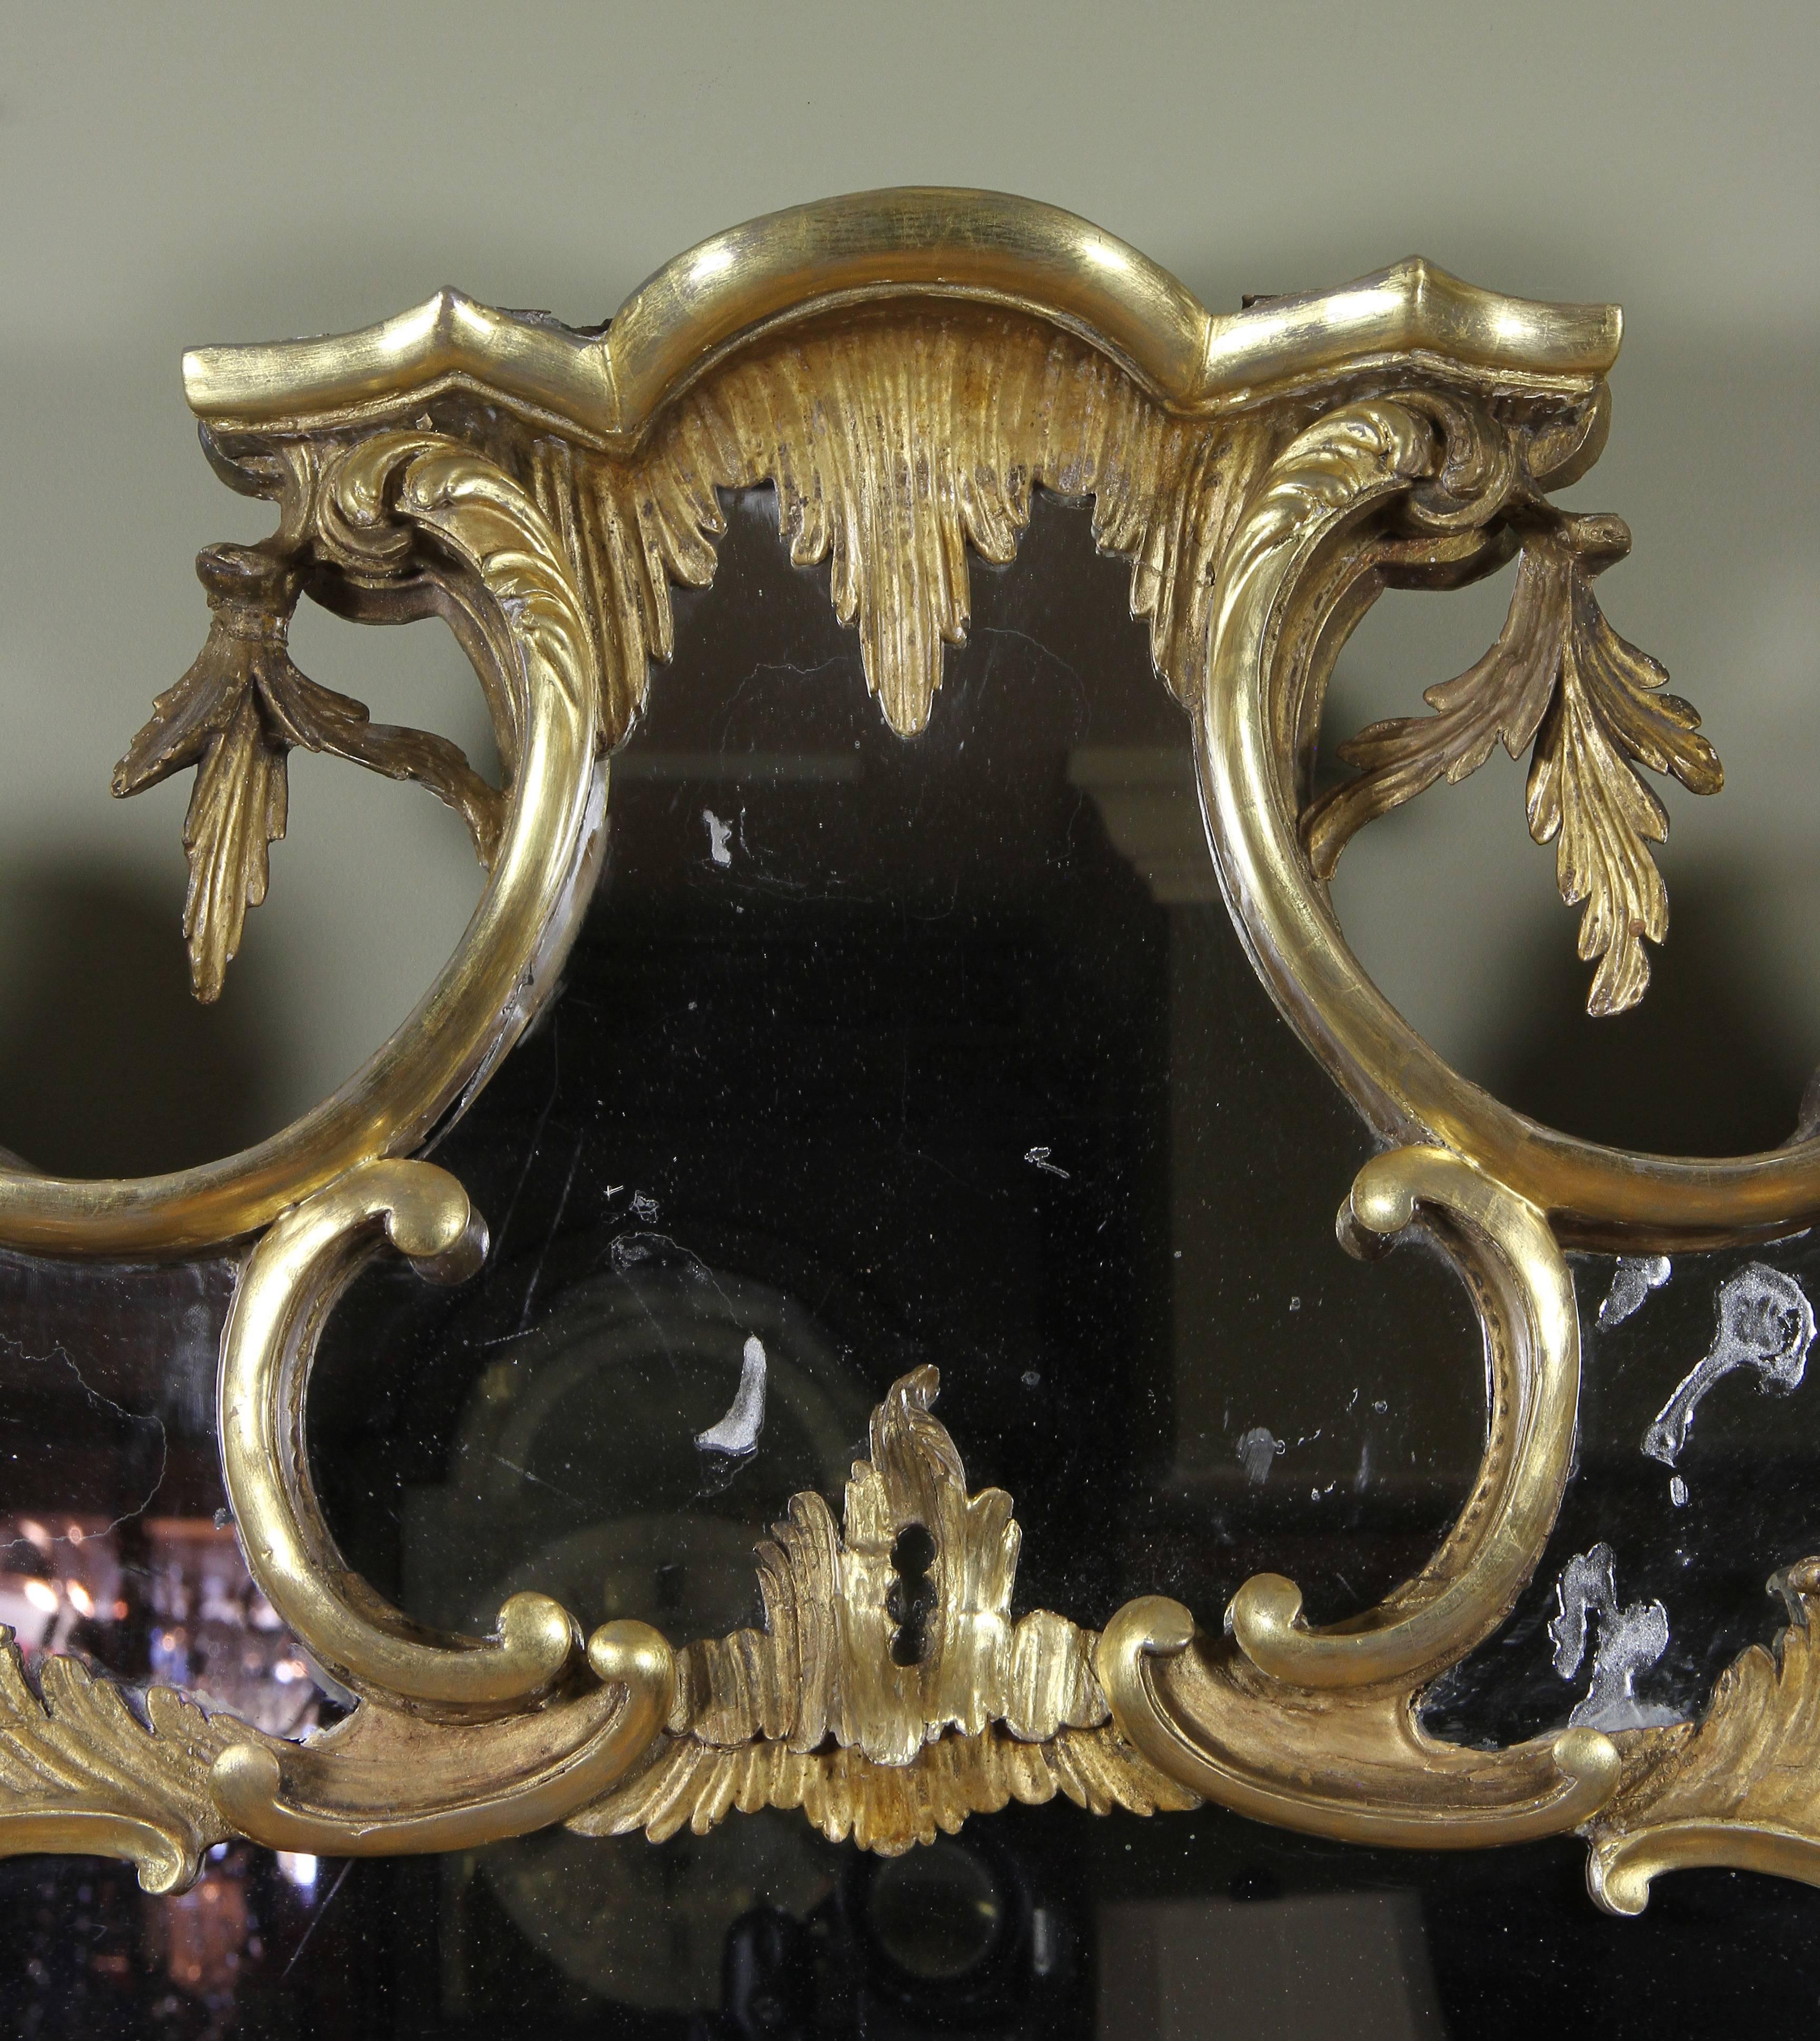 Mirror plate set within a scroll carved inner and outer frame decorated with C-scrolls, rocaille and cabochons. Original glass. Provenance: Park Avenue, New York apartment.